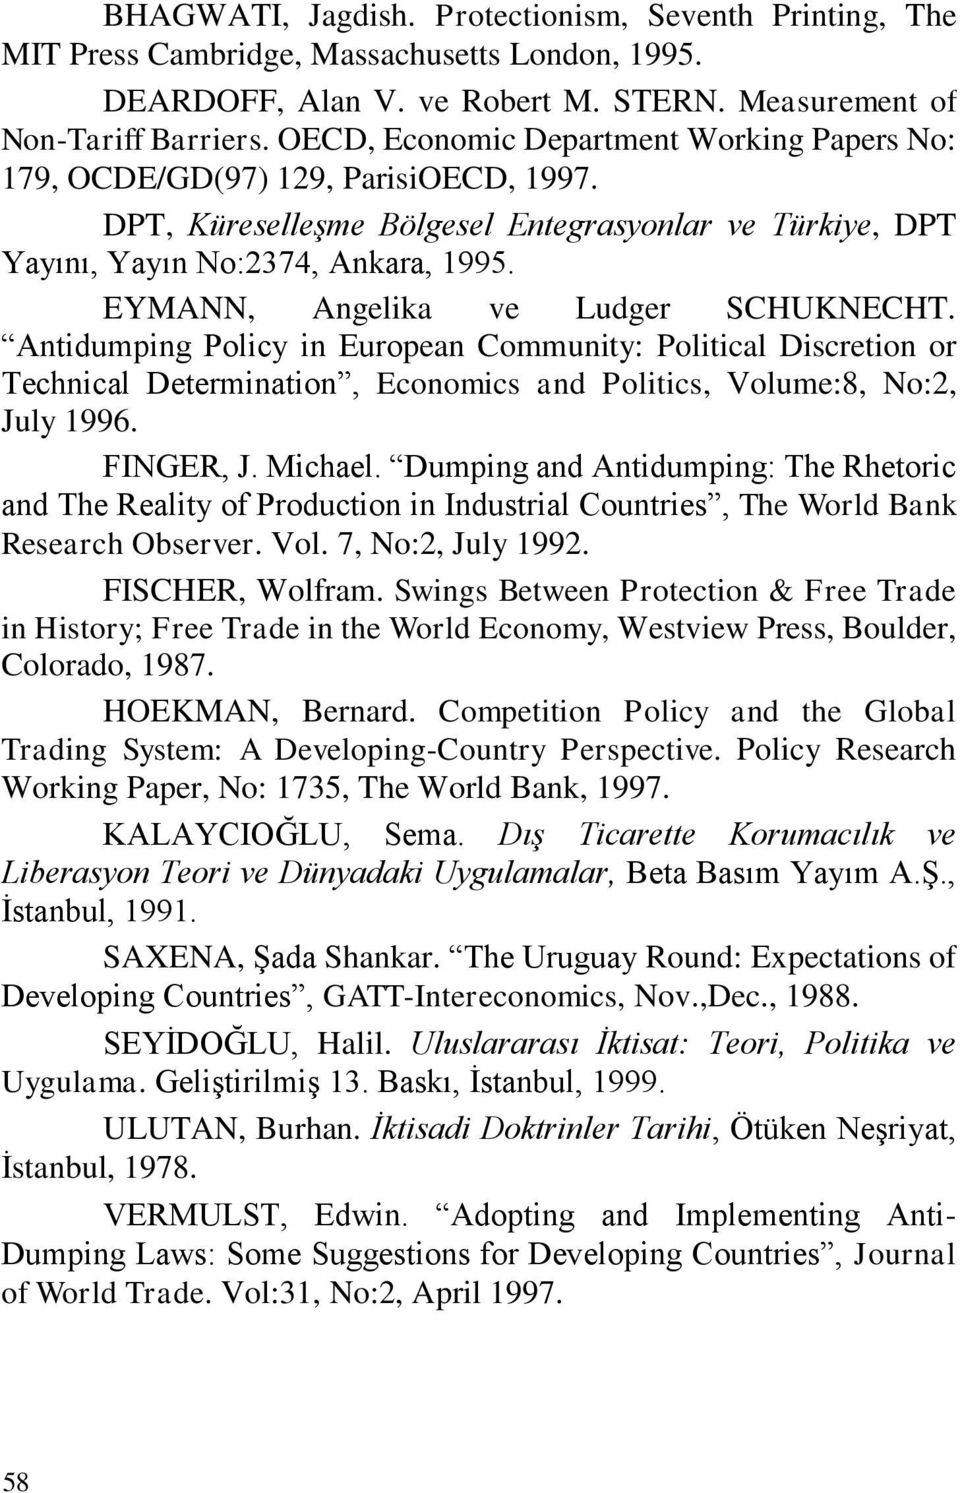 EYMANN, Angelika ve Ludger SCHUKNECHT. Antidumping Policy in European Community: Political Discretion or Technical Determination, Economics and Politics, Volume:8, No:2, July 1996. FINGER, J. Michael.